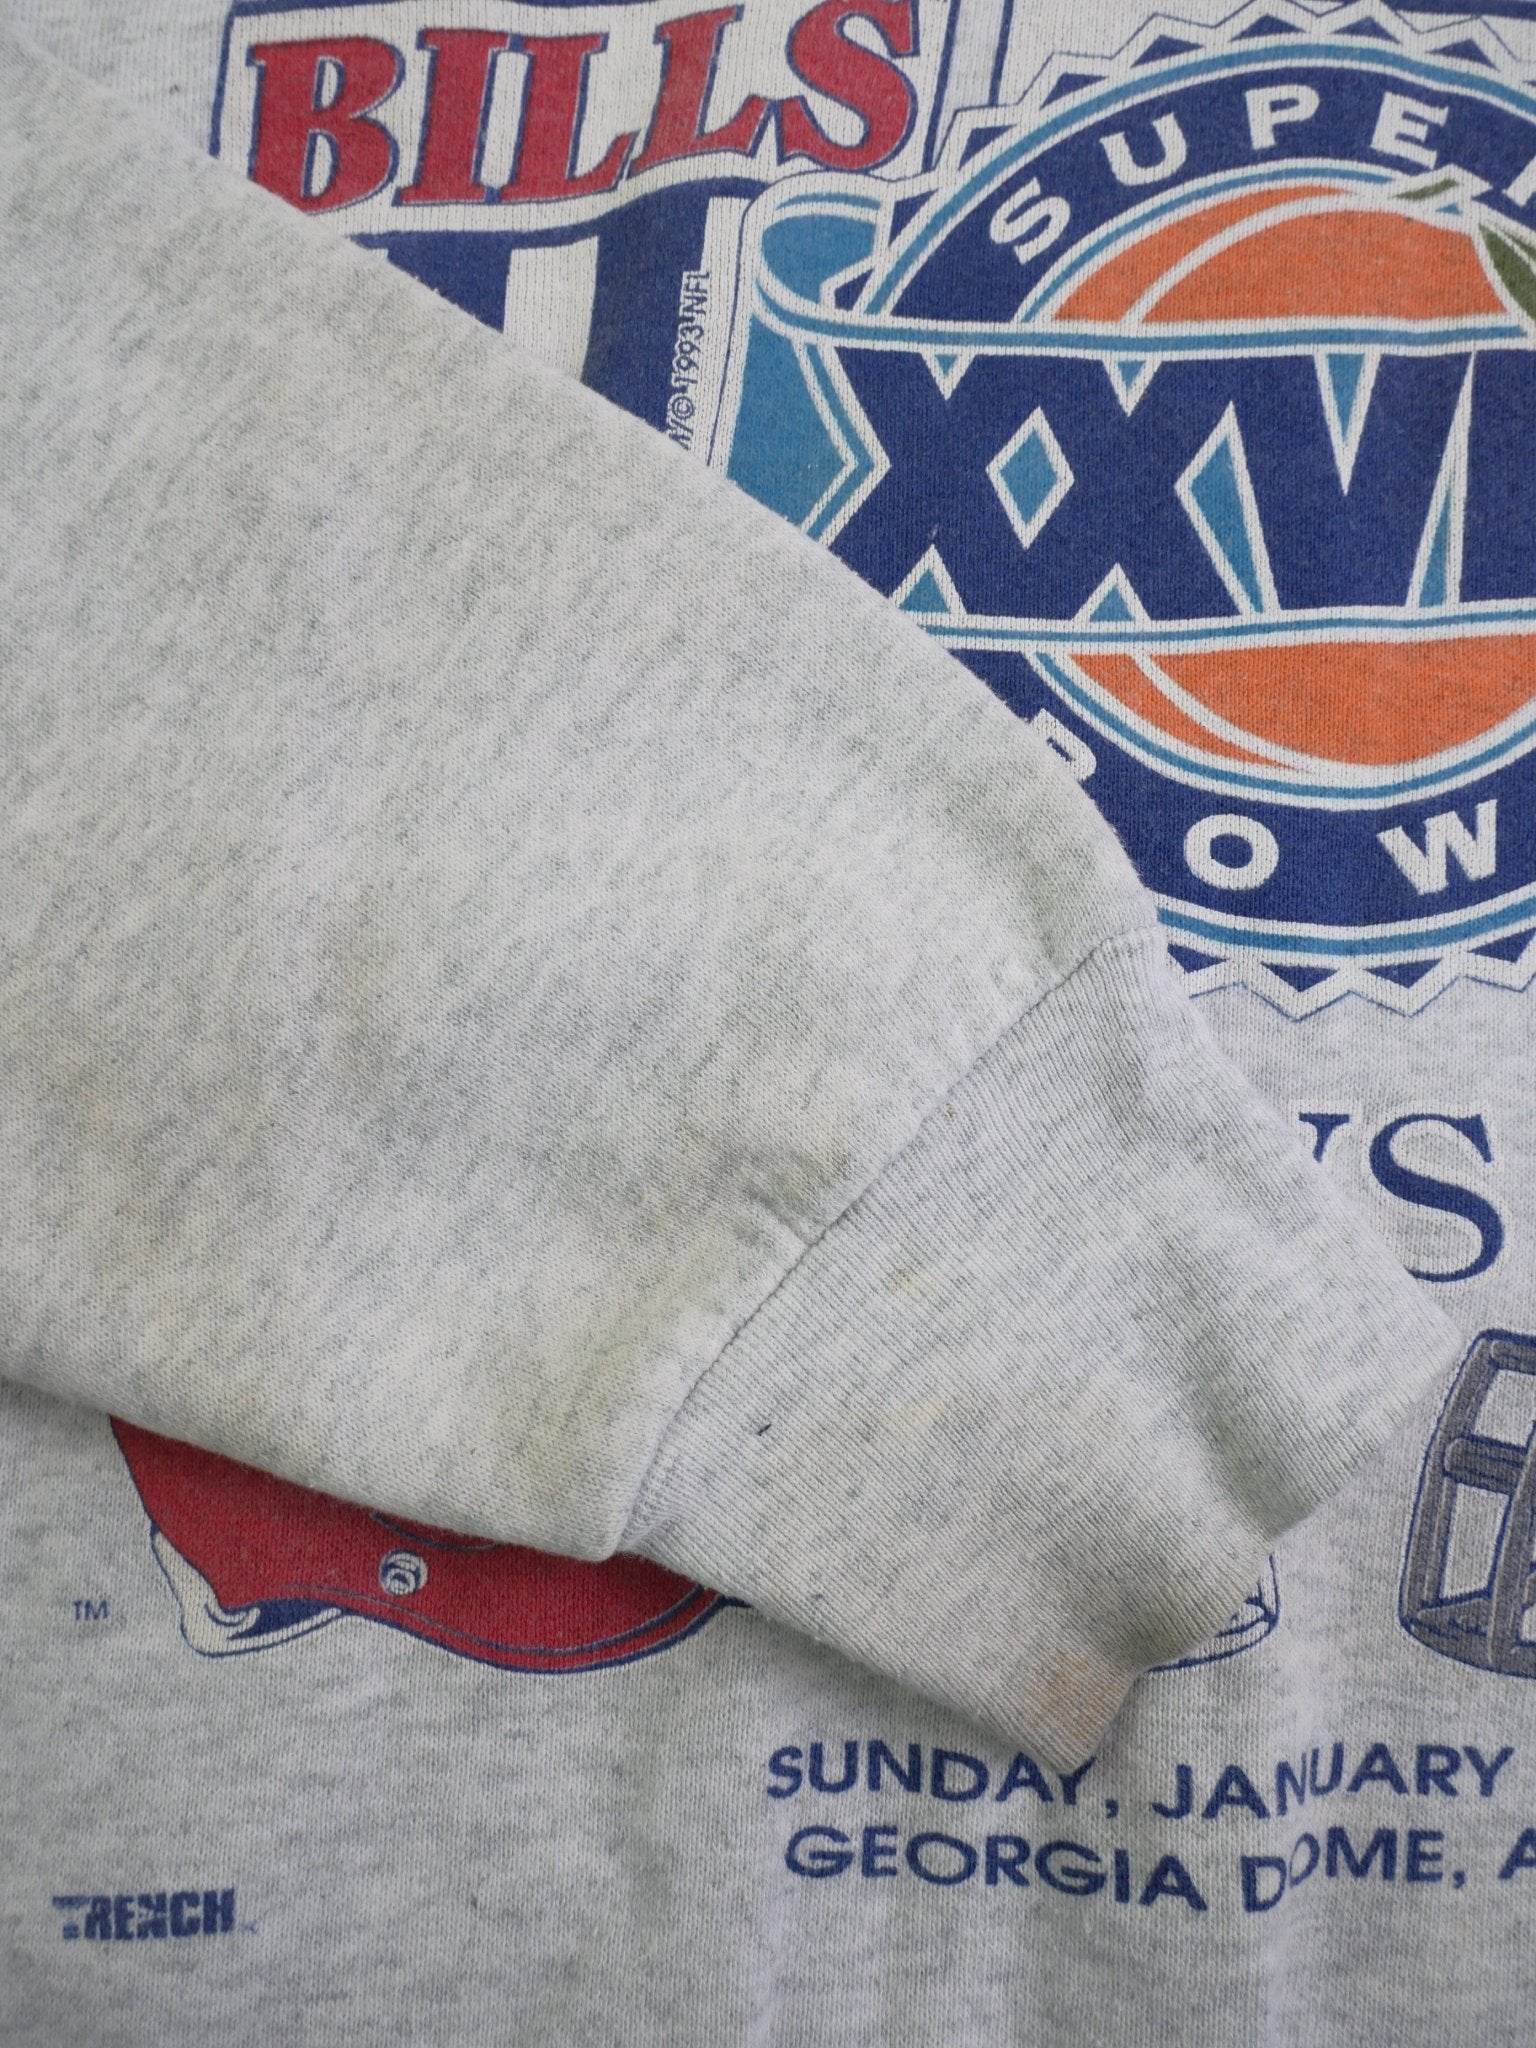 Super Bowl 1994 printed Graphic Vintage Sweater - Peeces